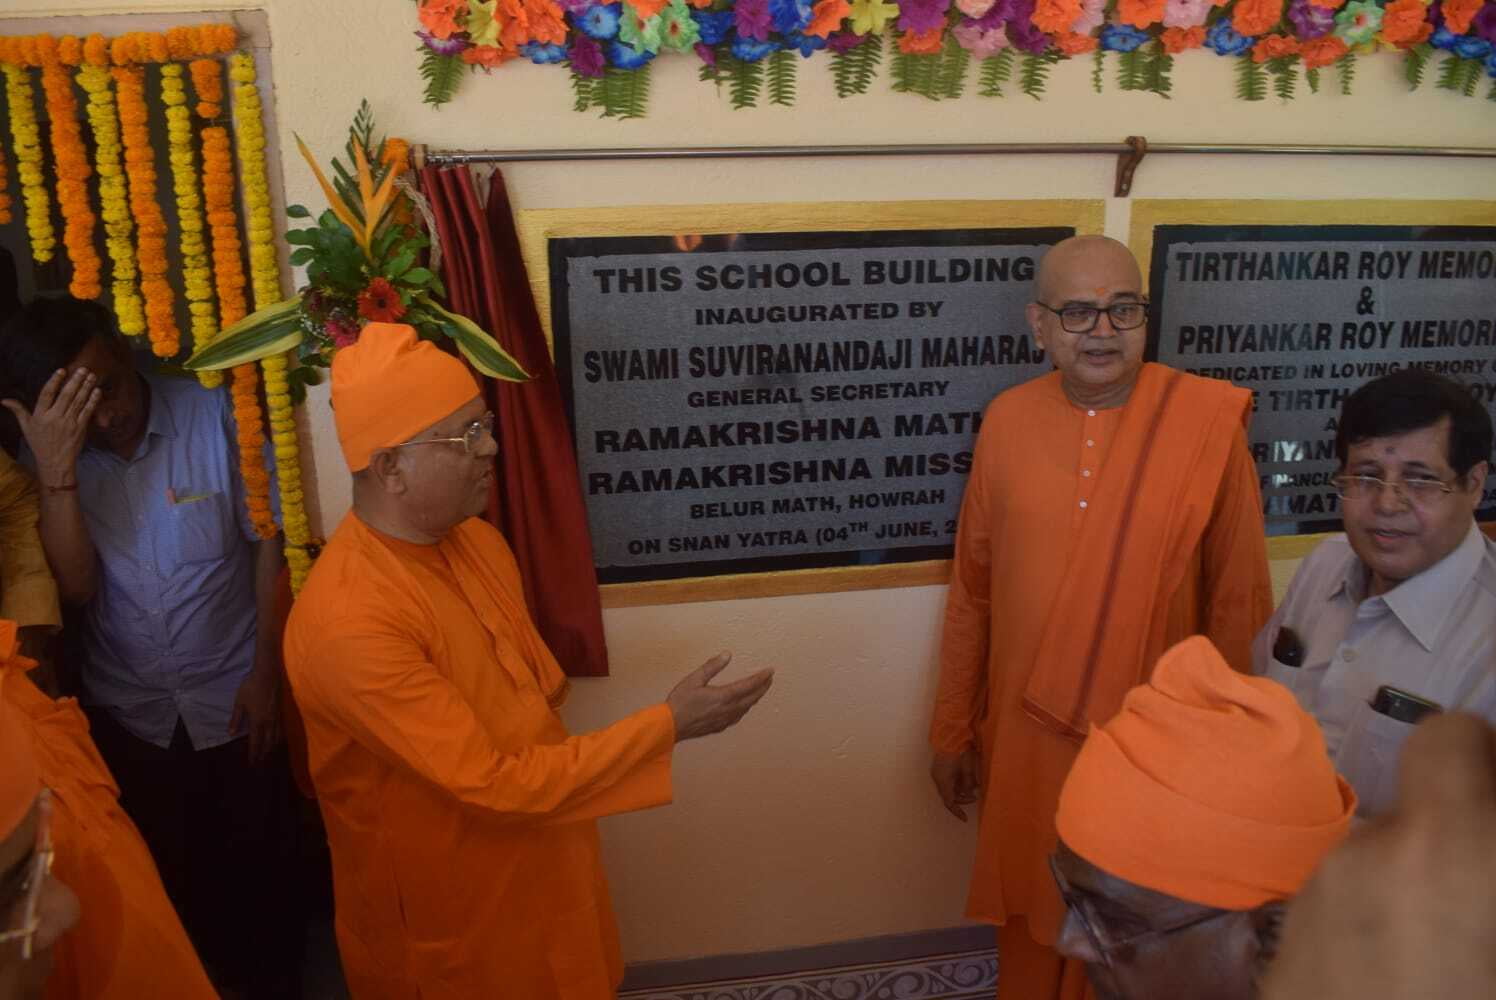 Inaguration of Higher Secondary Building